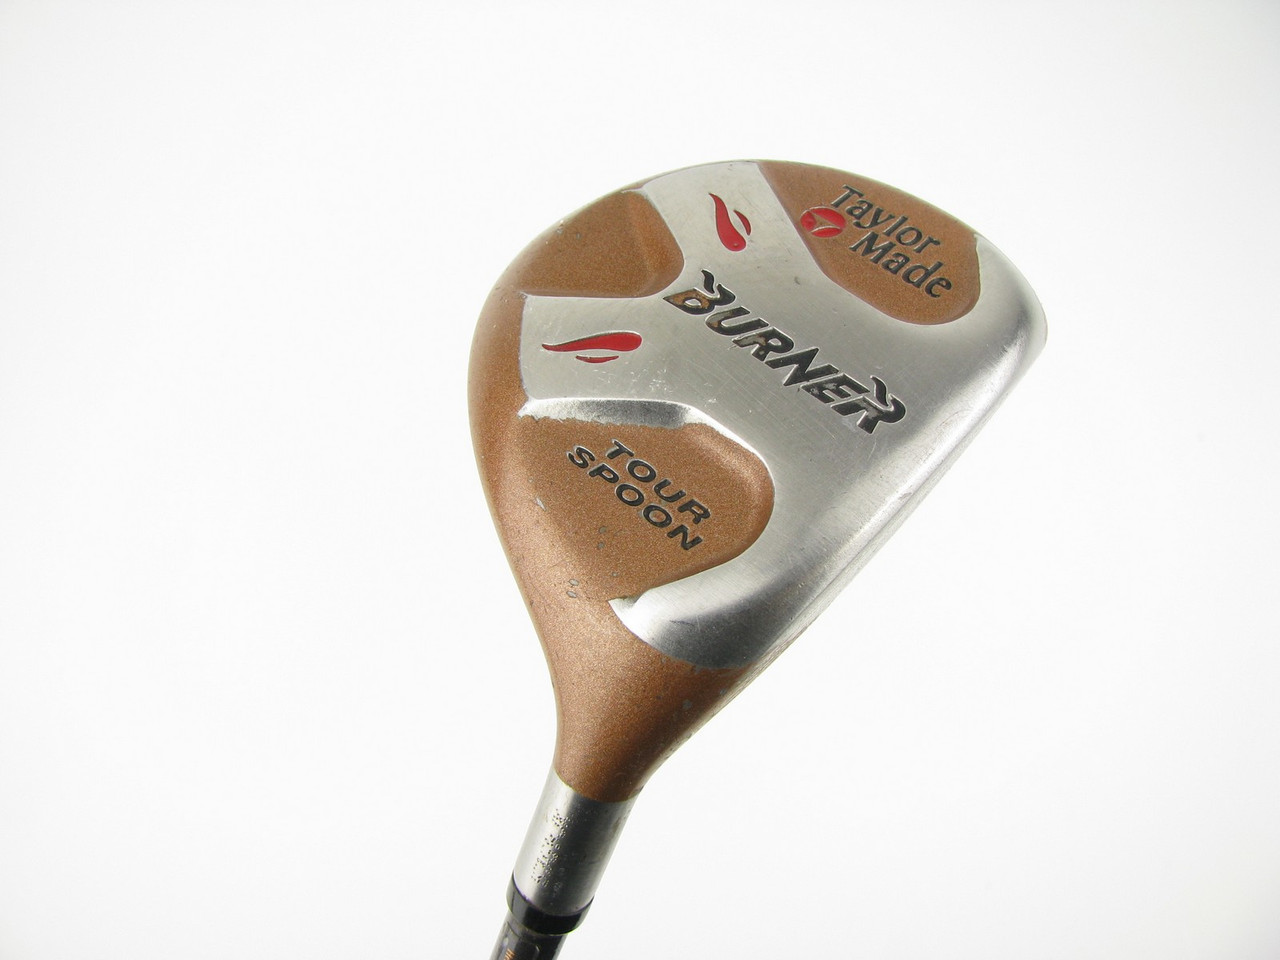 TaylorMade Burner Tour Spoon Fairway wood w/ Graphite Bubble S-90 Stiff -  Clubs n Covers Golf